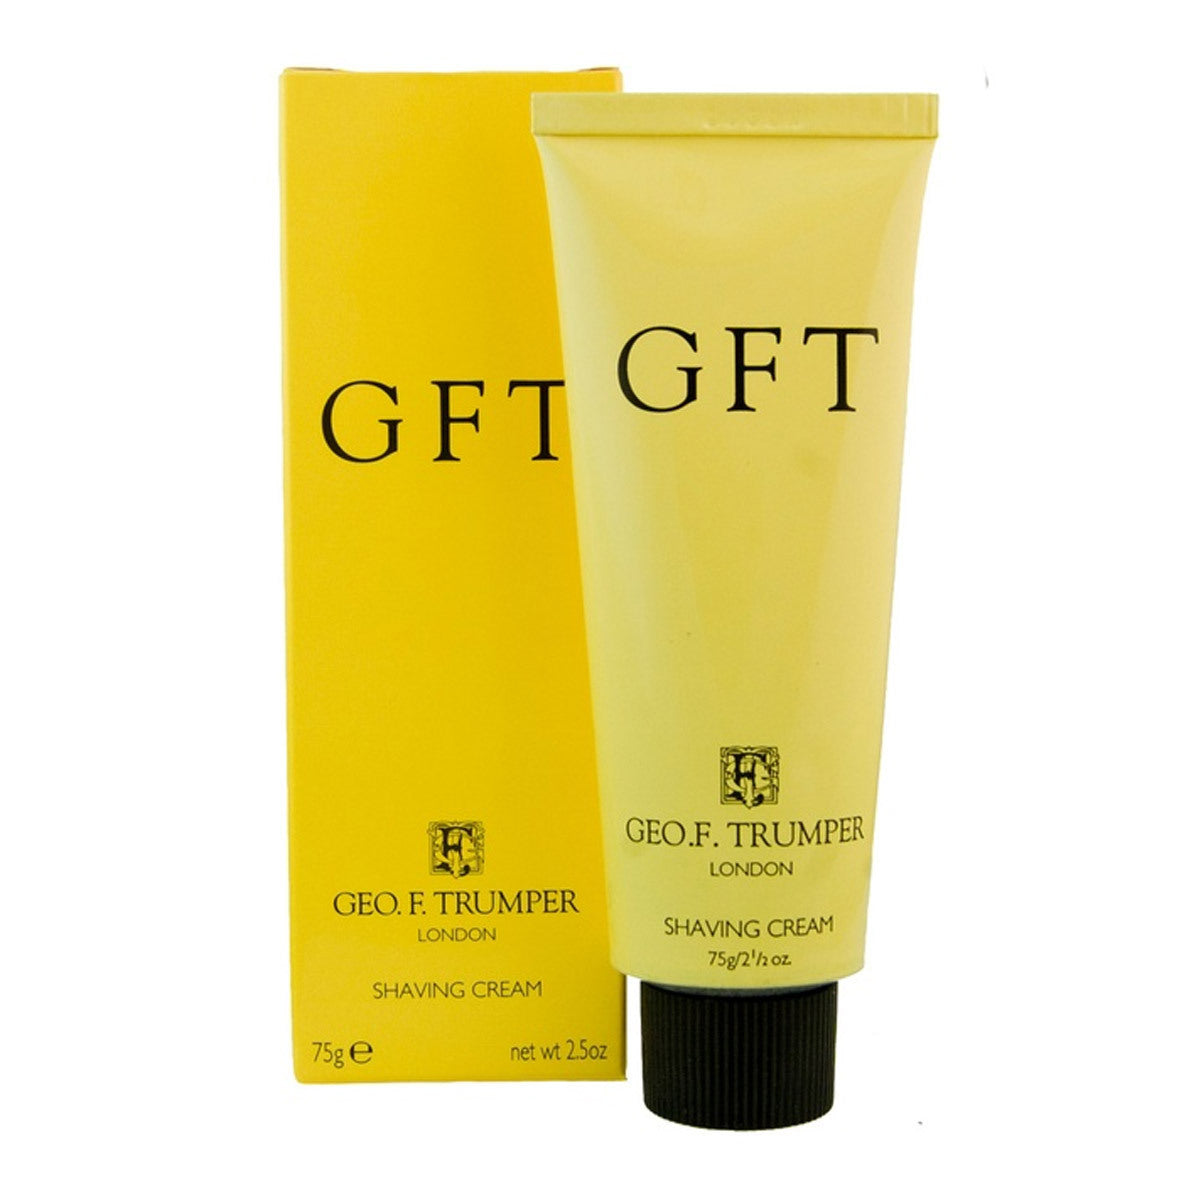 Primary image of GFT Shaving Cream in a Tube